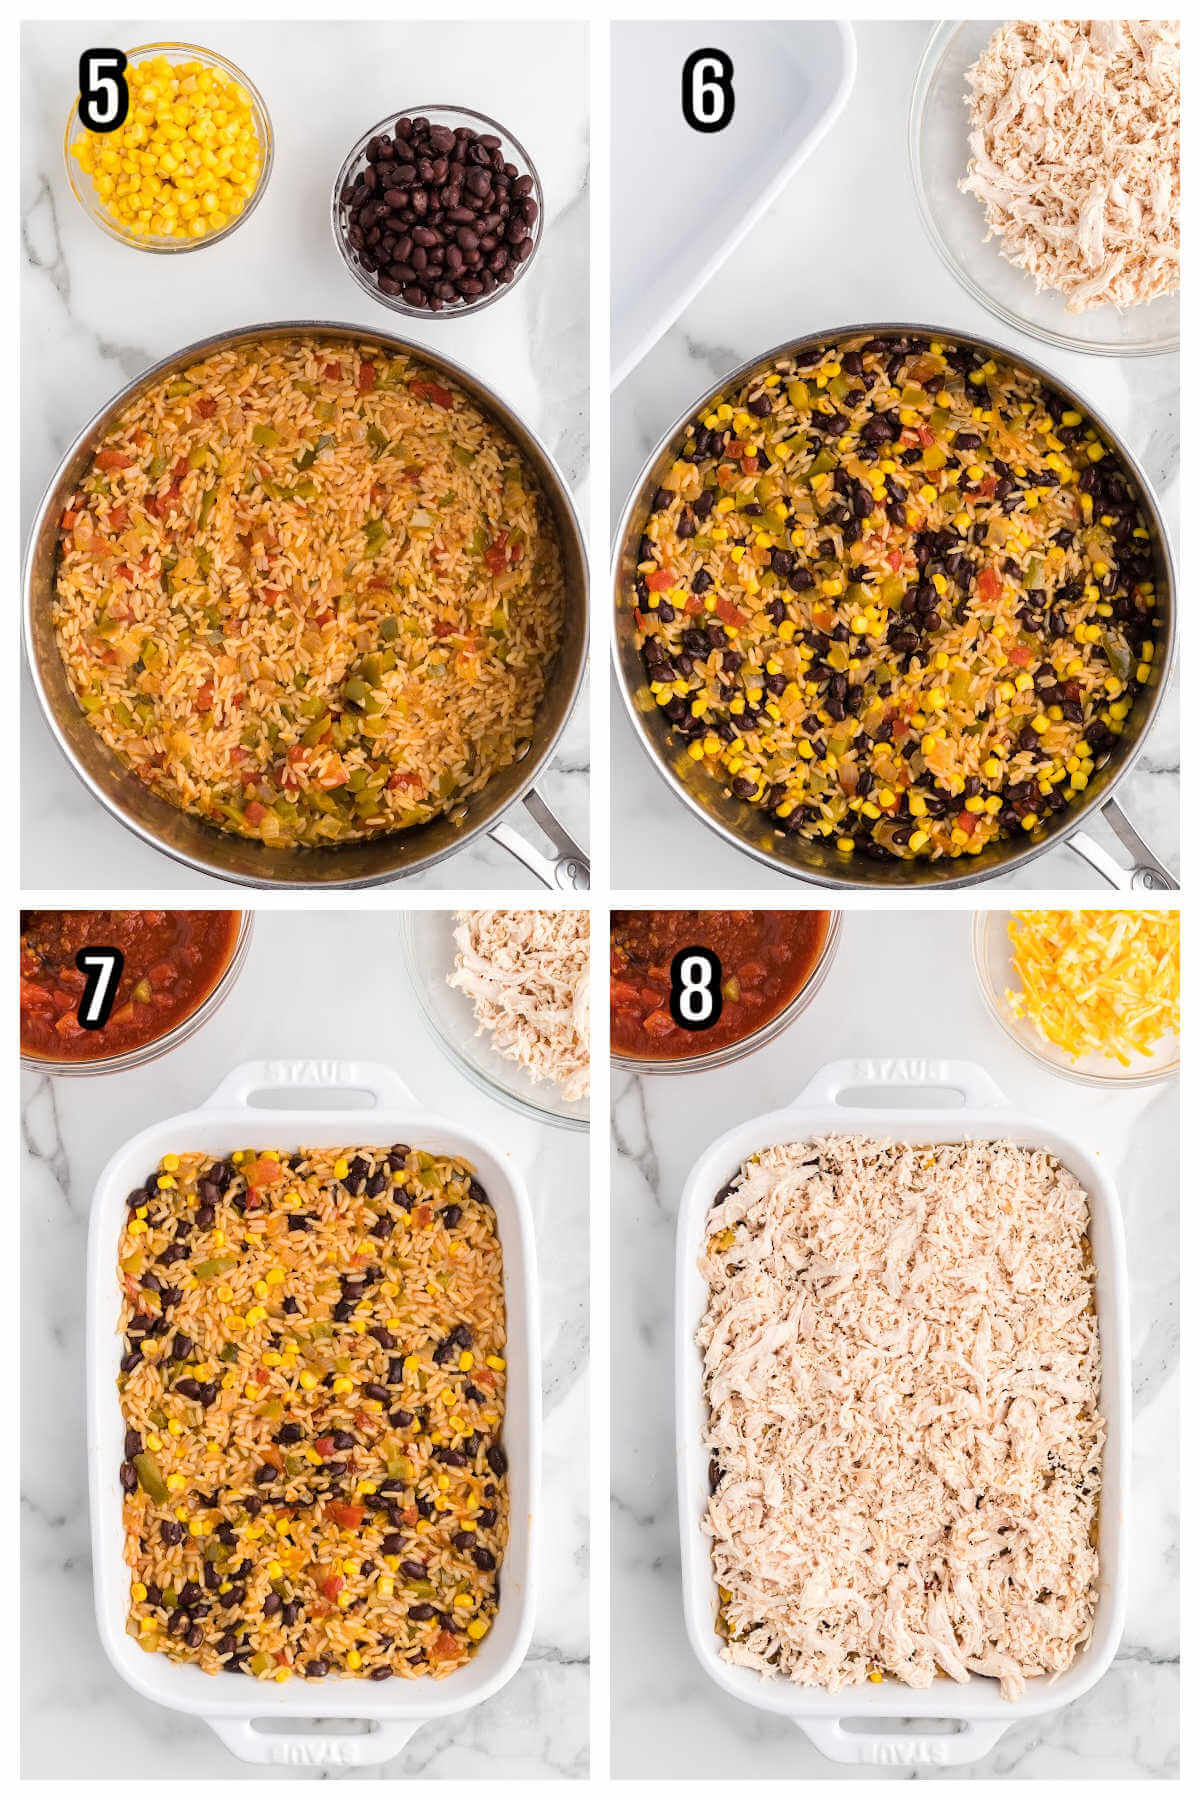 Second set of four steps to assembling the Mexican Chicken casserole with rice and black beans. 